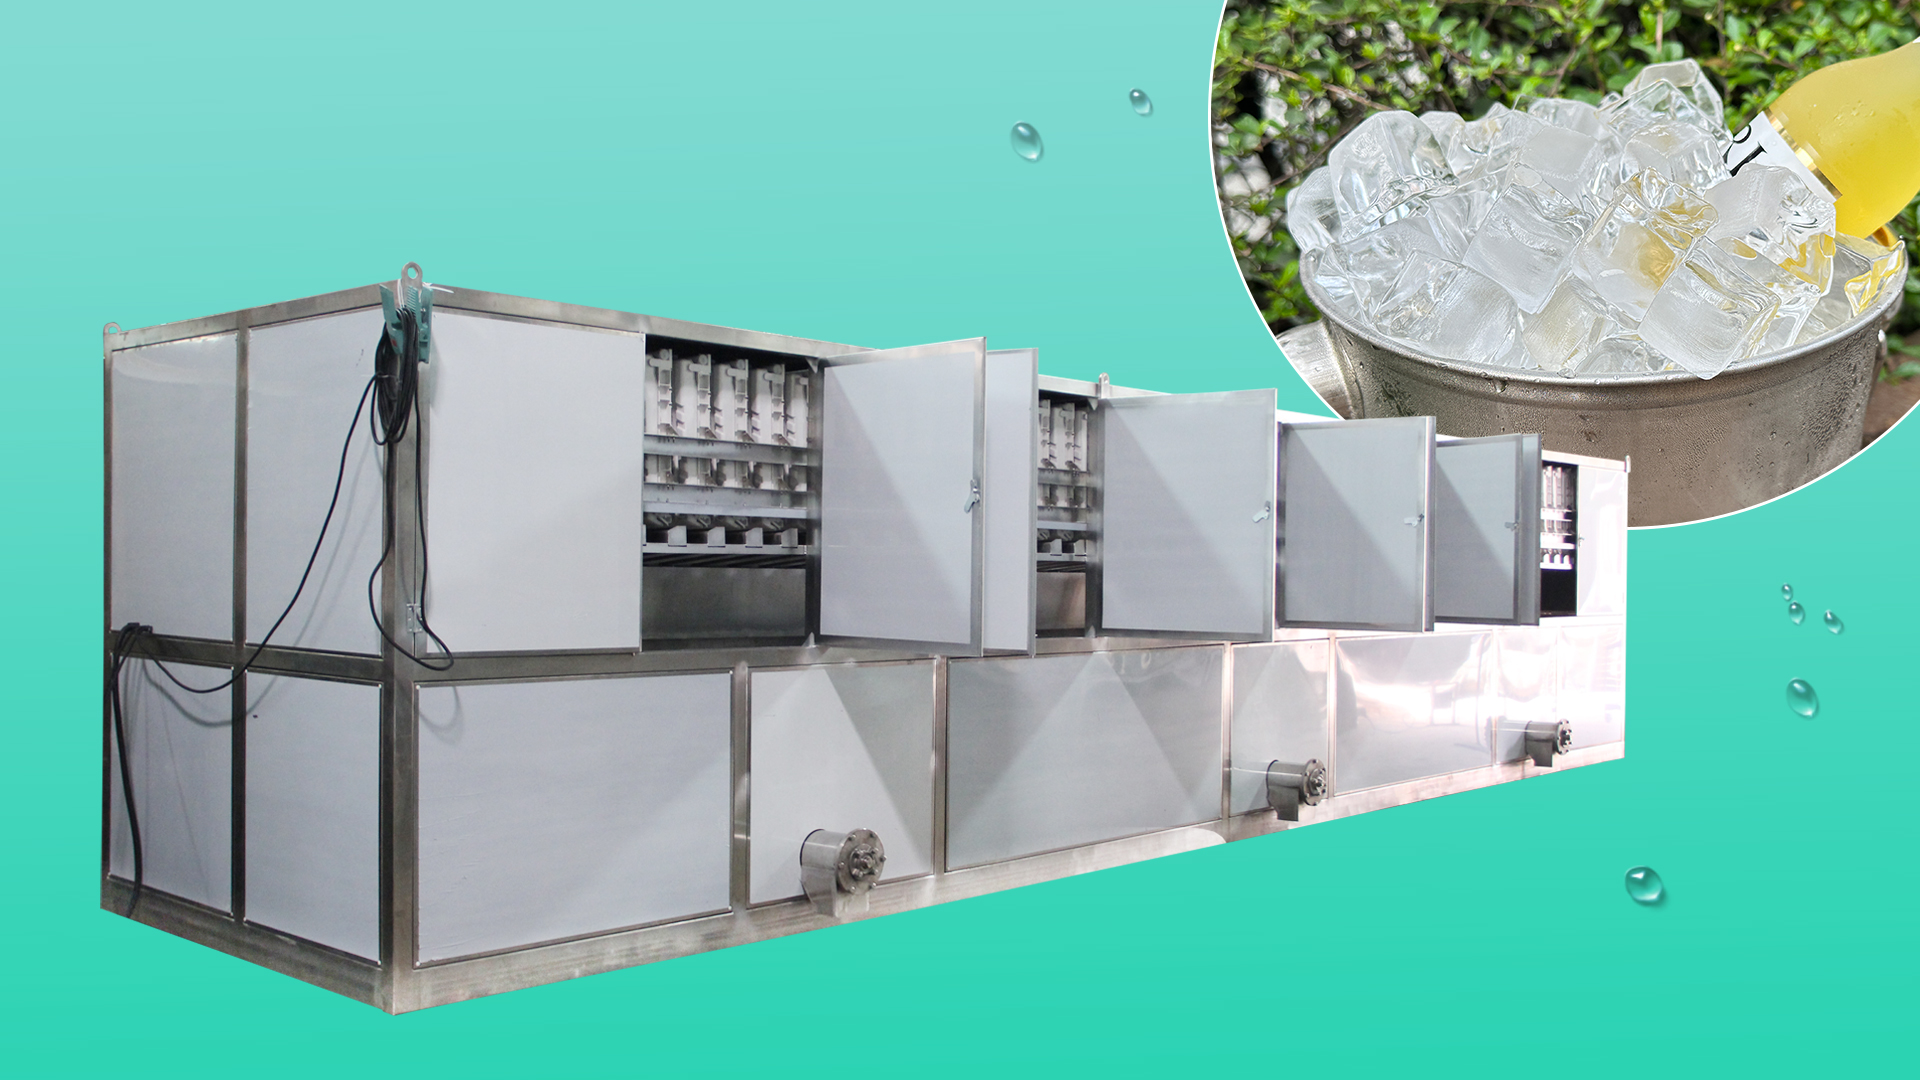 The 13 ton industrial cube ice machine has been manufactured and tested in the ICESTA workshop